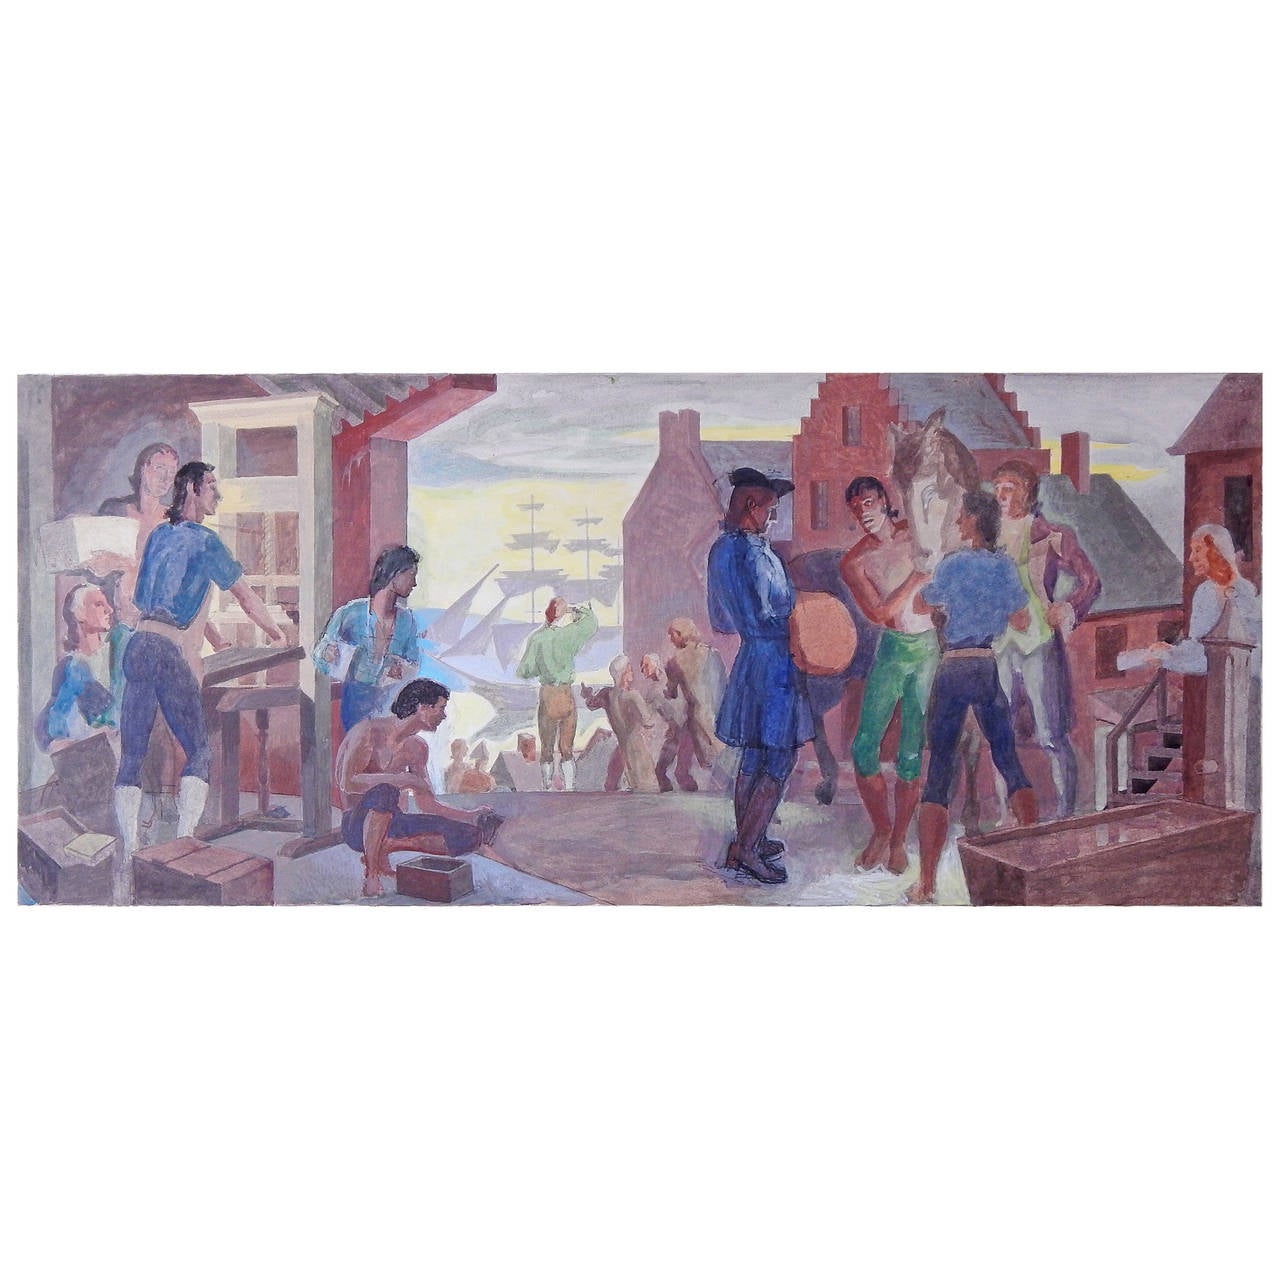 "The Return of Timothy Pickering, " WPA Mural Study Painting, 1939